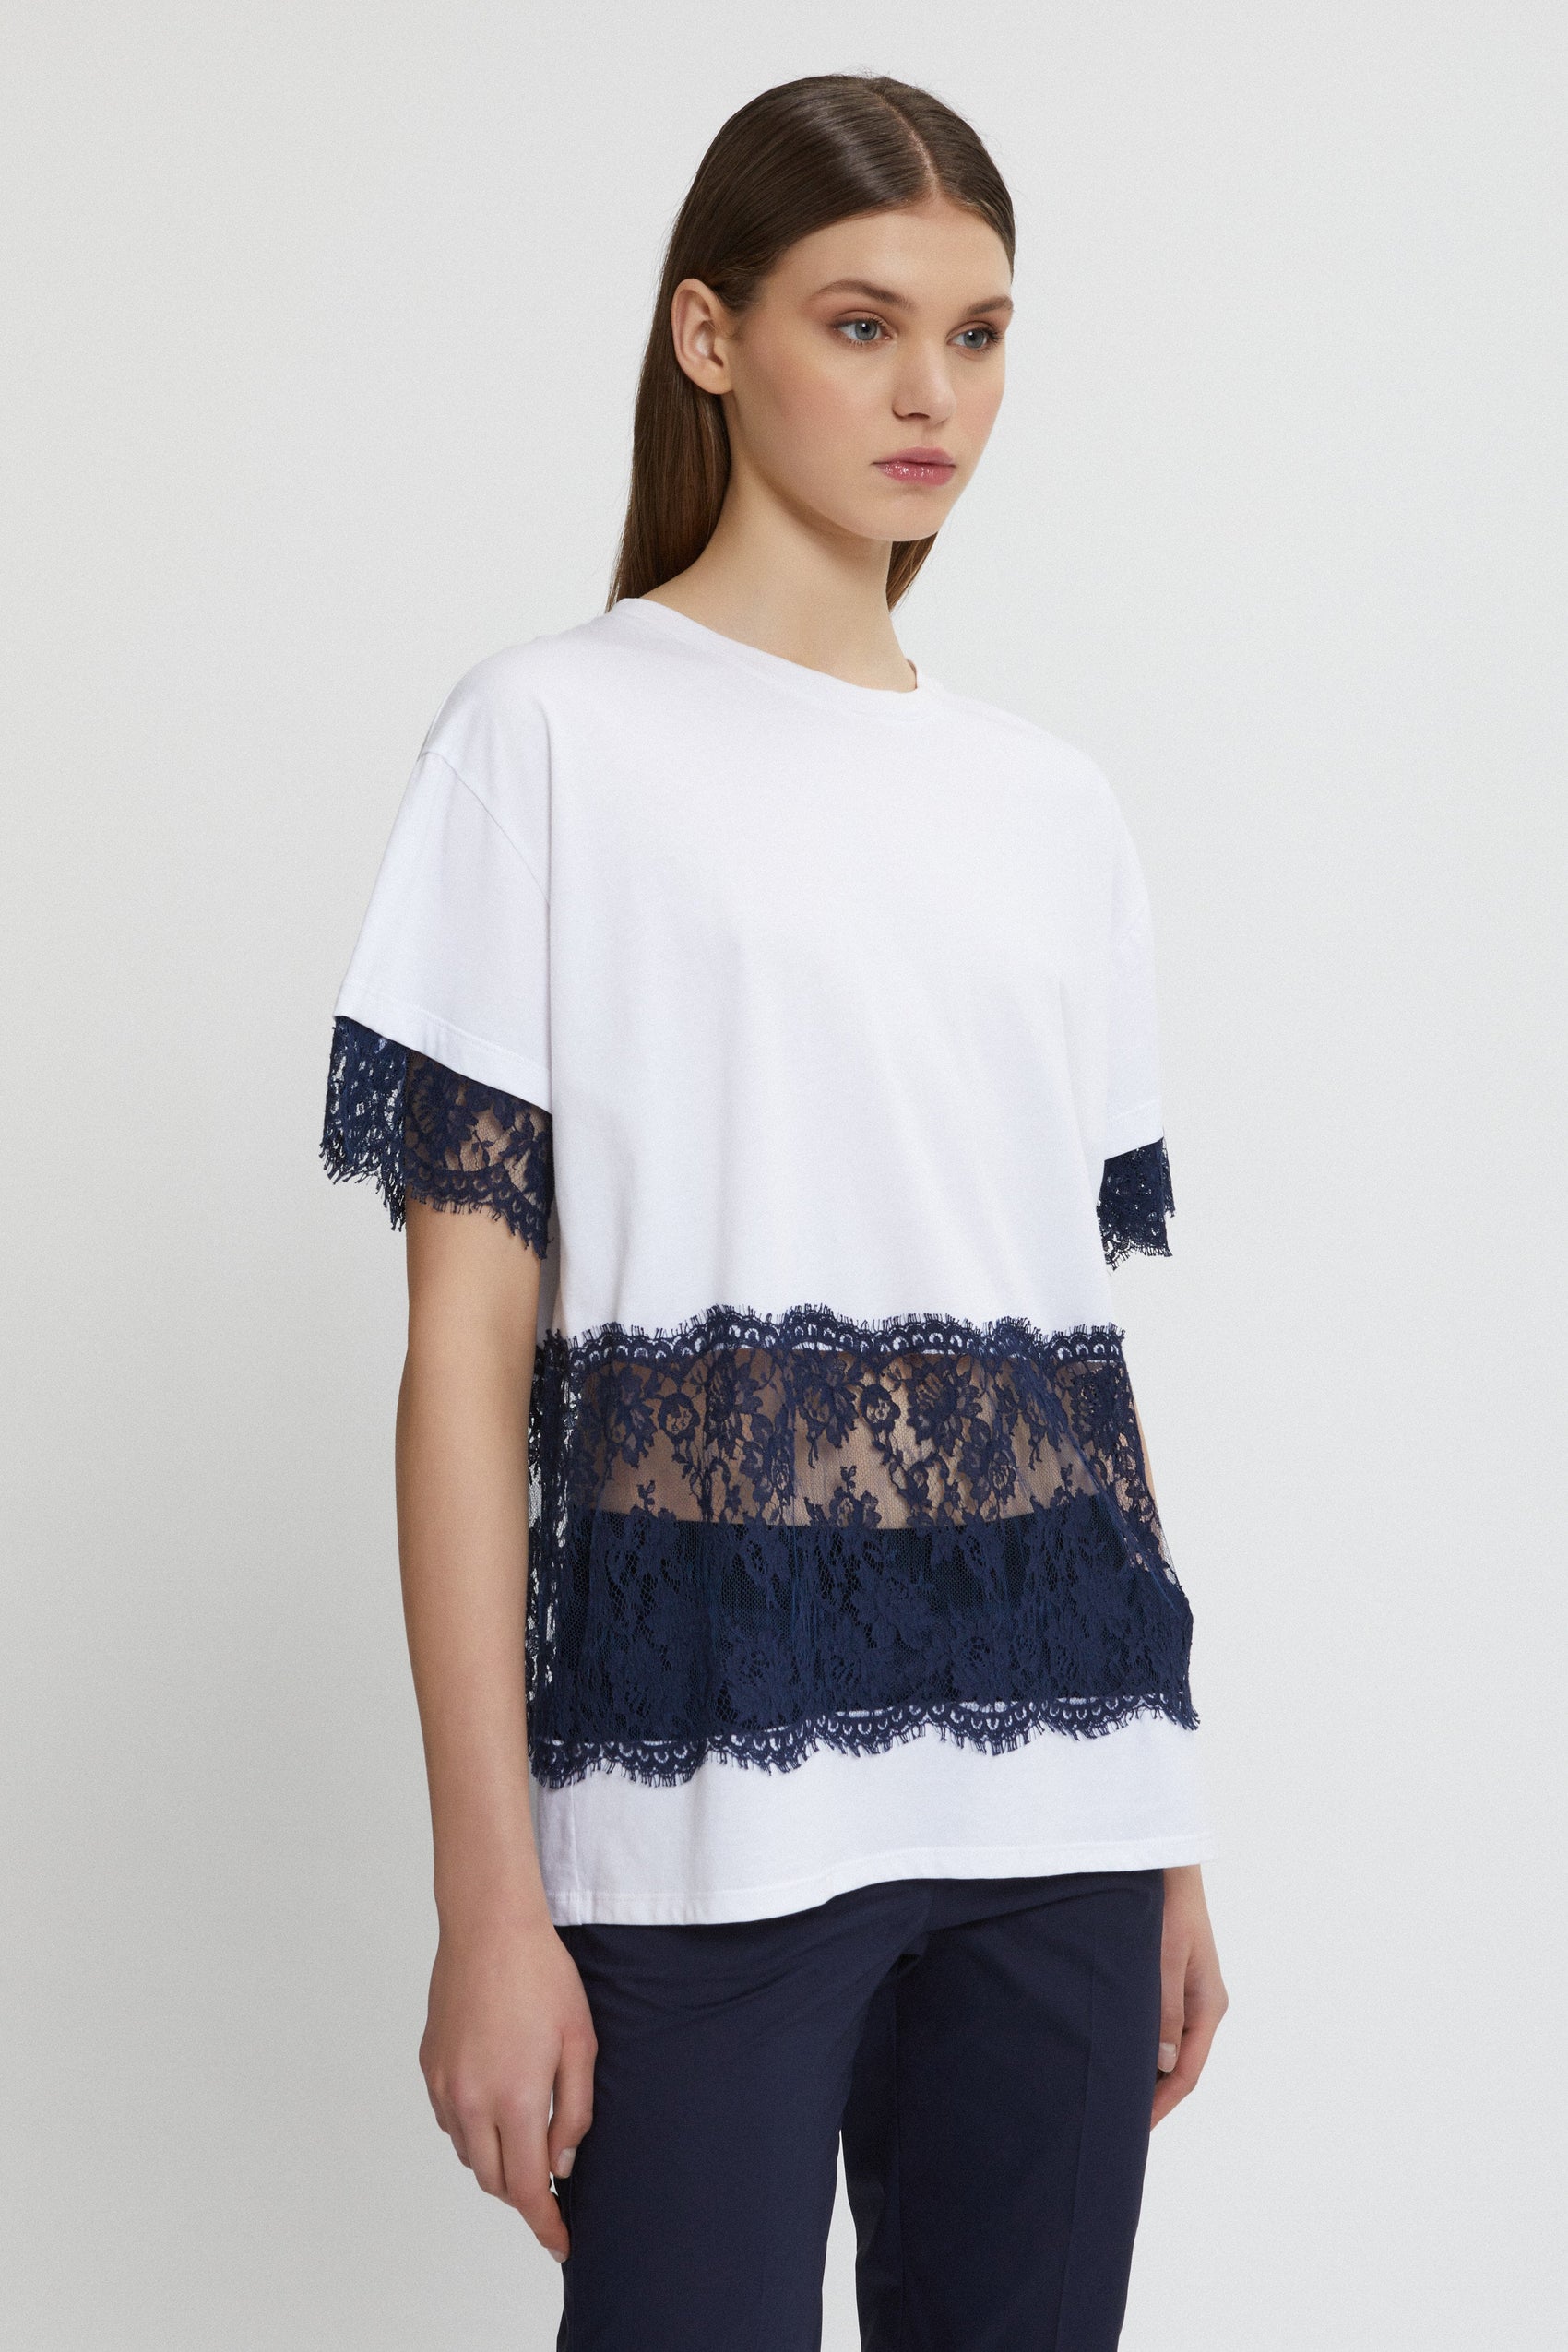 T-SHIRT WITH LACE VALENCIENNE INSERT